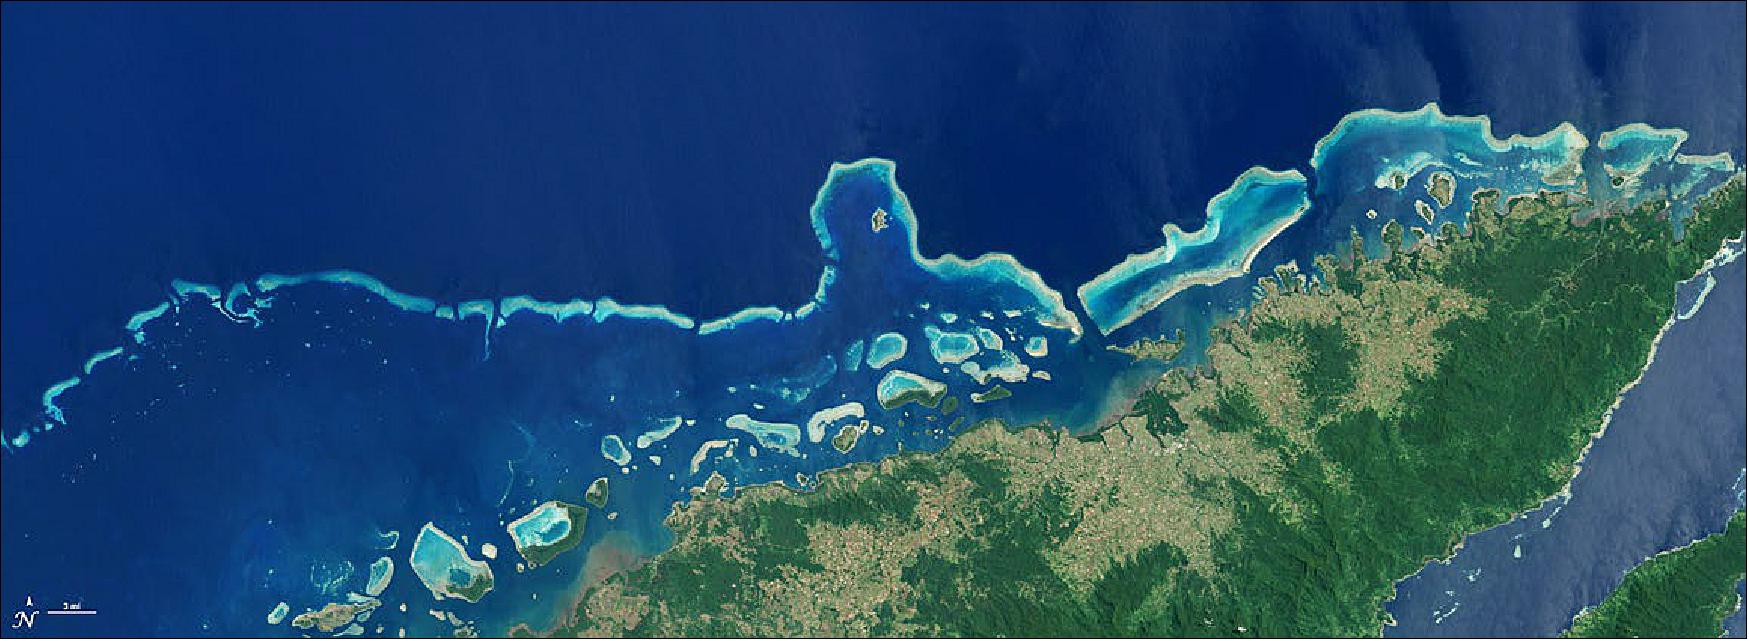 Figure 21: Coral reefs in the vicinity of Vanua Levu, Fiji’s second-largest island, acquired on 19 September 2002 (image credit: NASA)